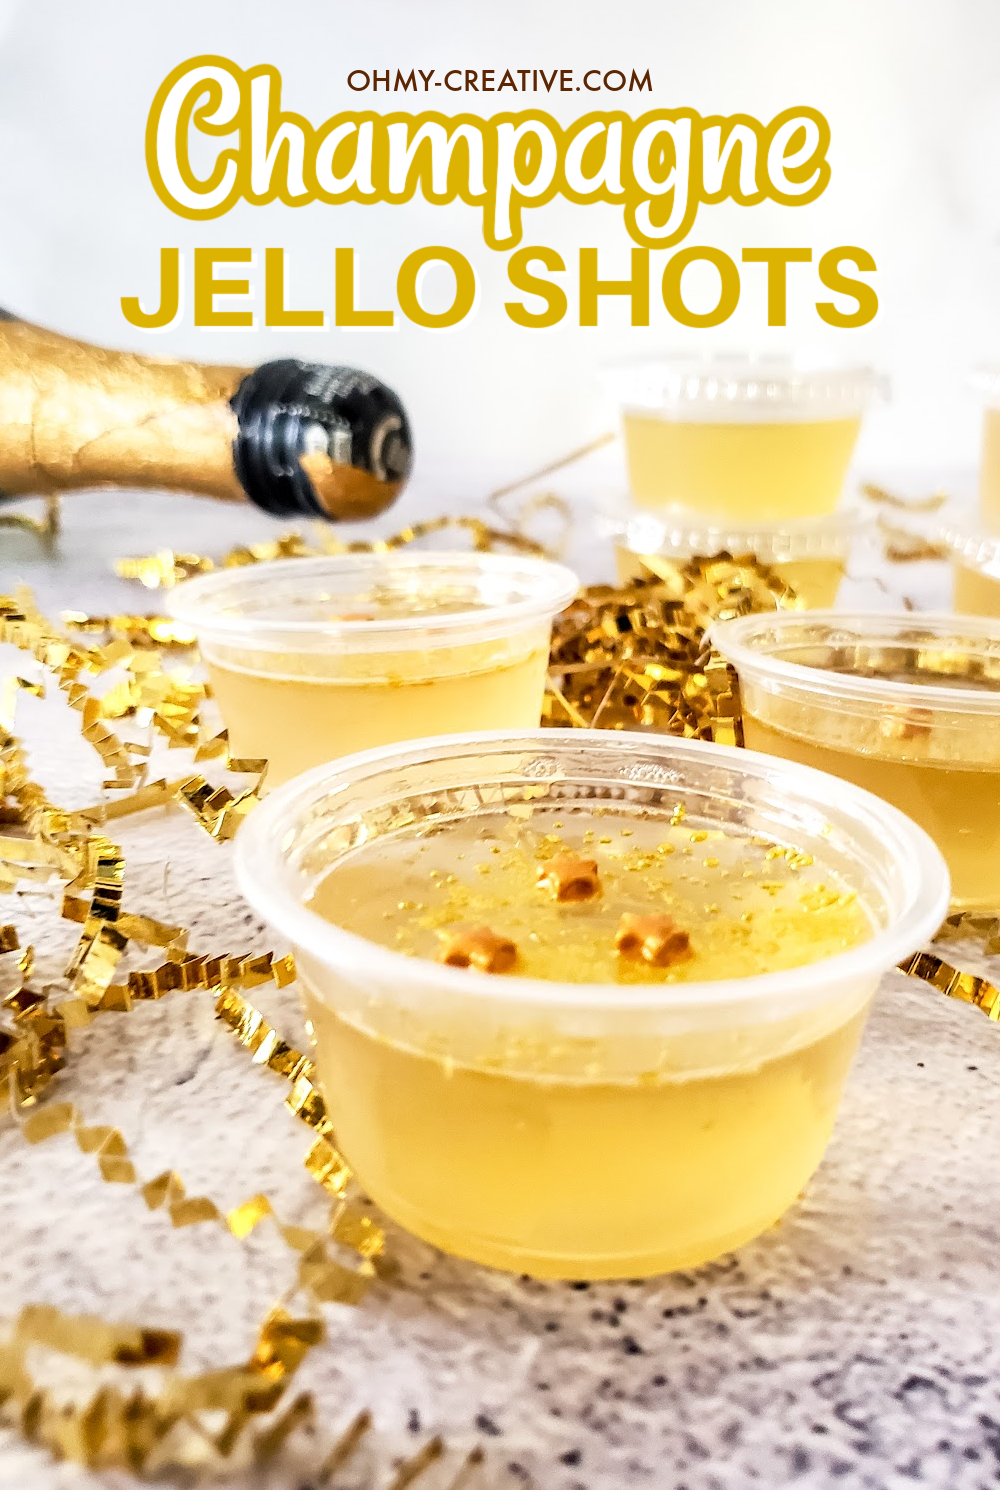 Champagne Jello Shots with a champagne bottle in the background